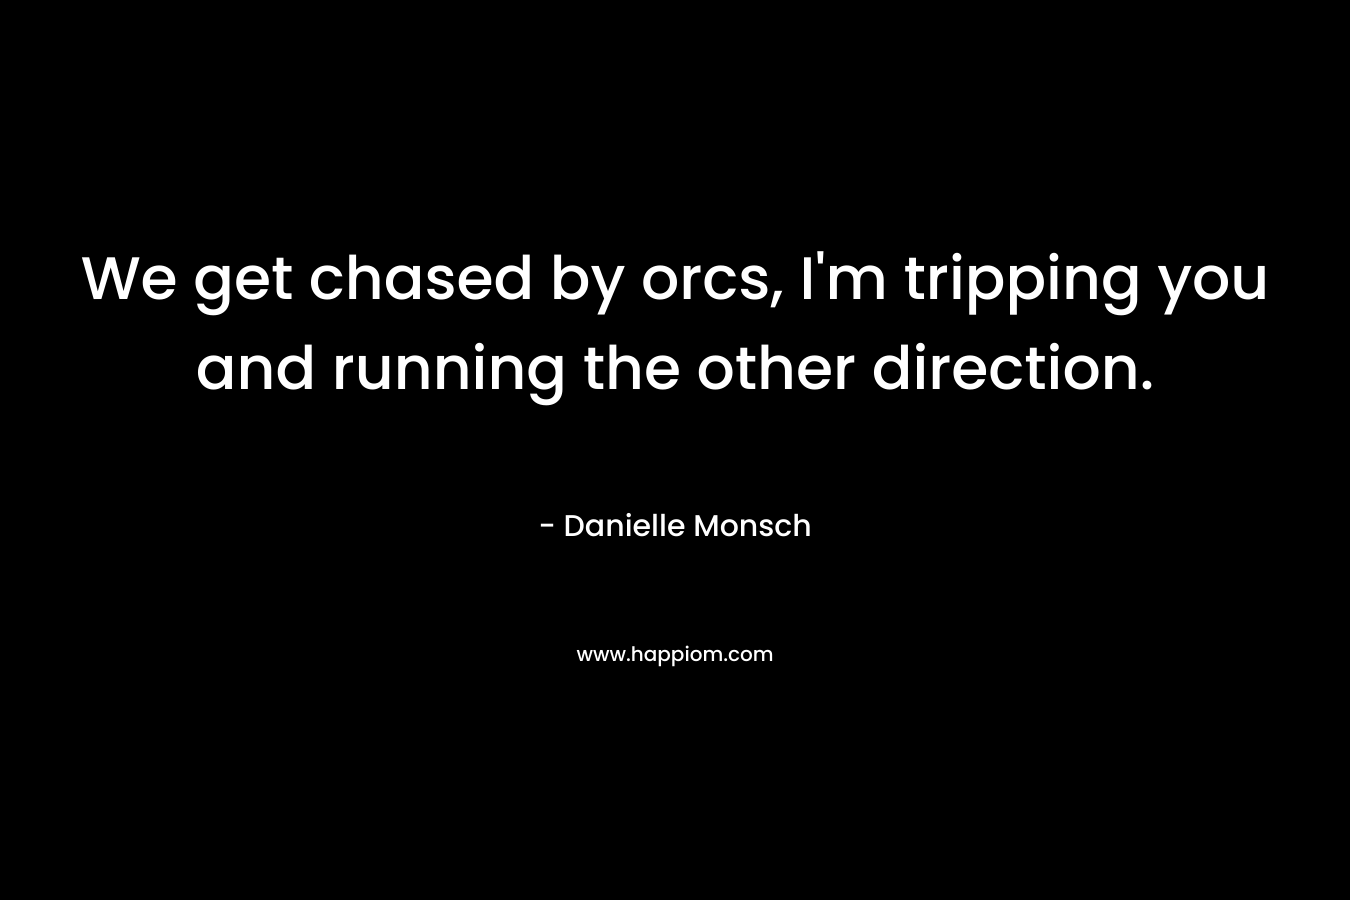 We get chased by orcs, I’m tripping you and running the other direction. – Danielle Monsch